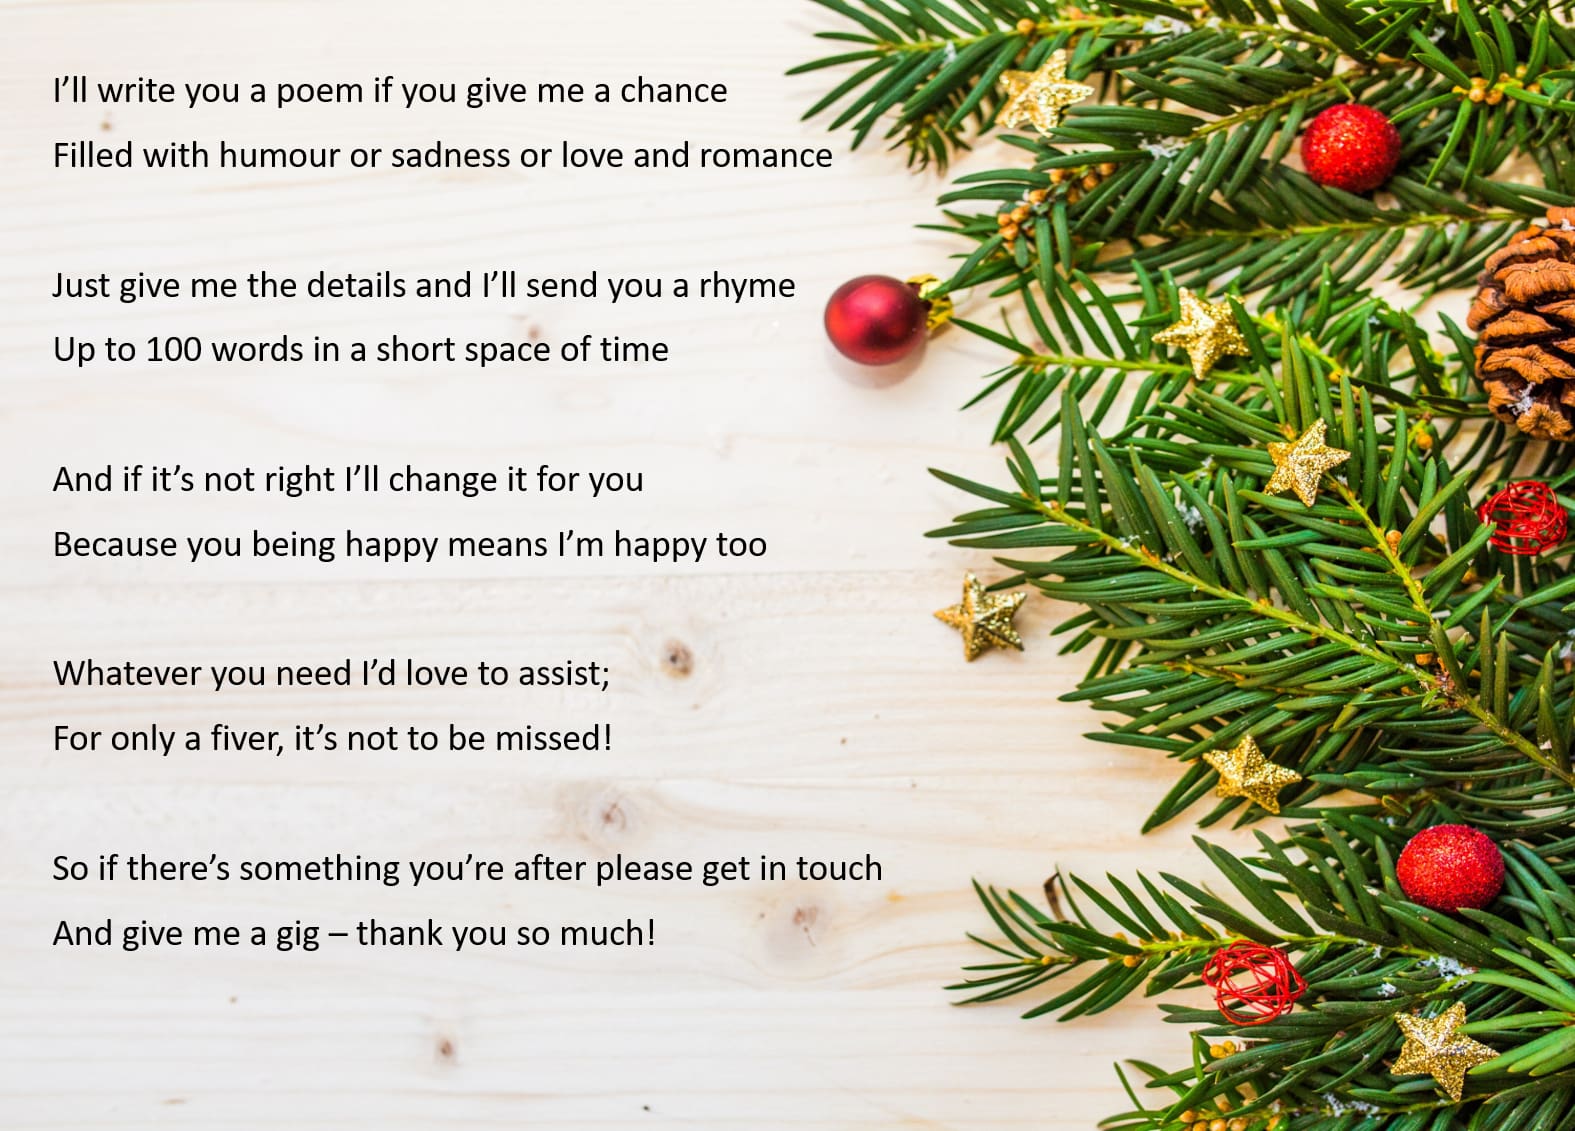 Write you a poem that rhymes in a short space of time by